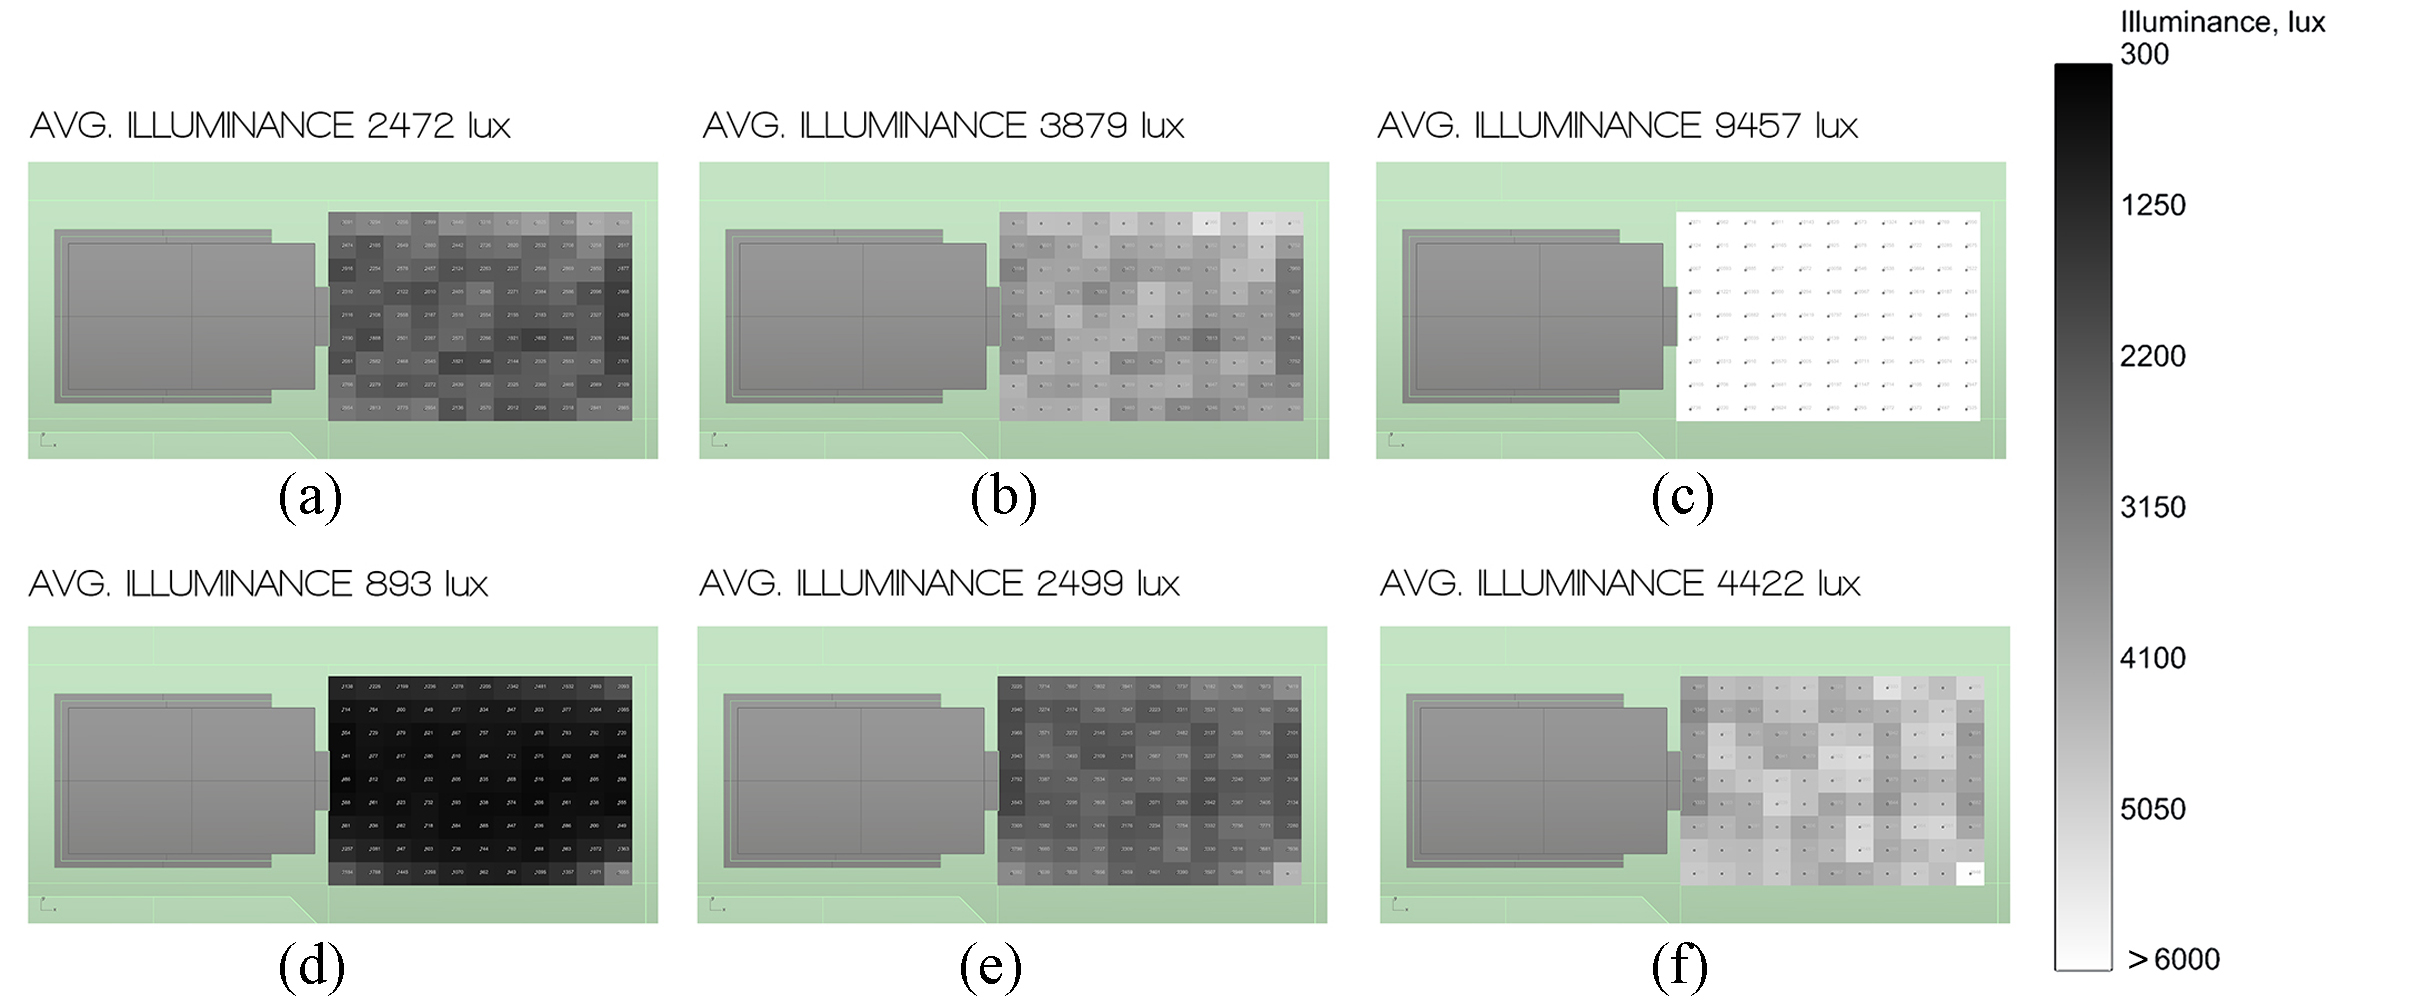 PIT illuminance values under the PBR shading system for different Tv values. Brisbane, on September 21 at 9 in the morning: (a) clear sky and Tv = 10%, (b) clear sky and Tv = 20%, (c) clear sky and Tv = 40%, (d) overcast sky and Tv = 10%, (e) overcast sky and Tv = 20%, and (f) overcast sky and Tv = 40%.